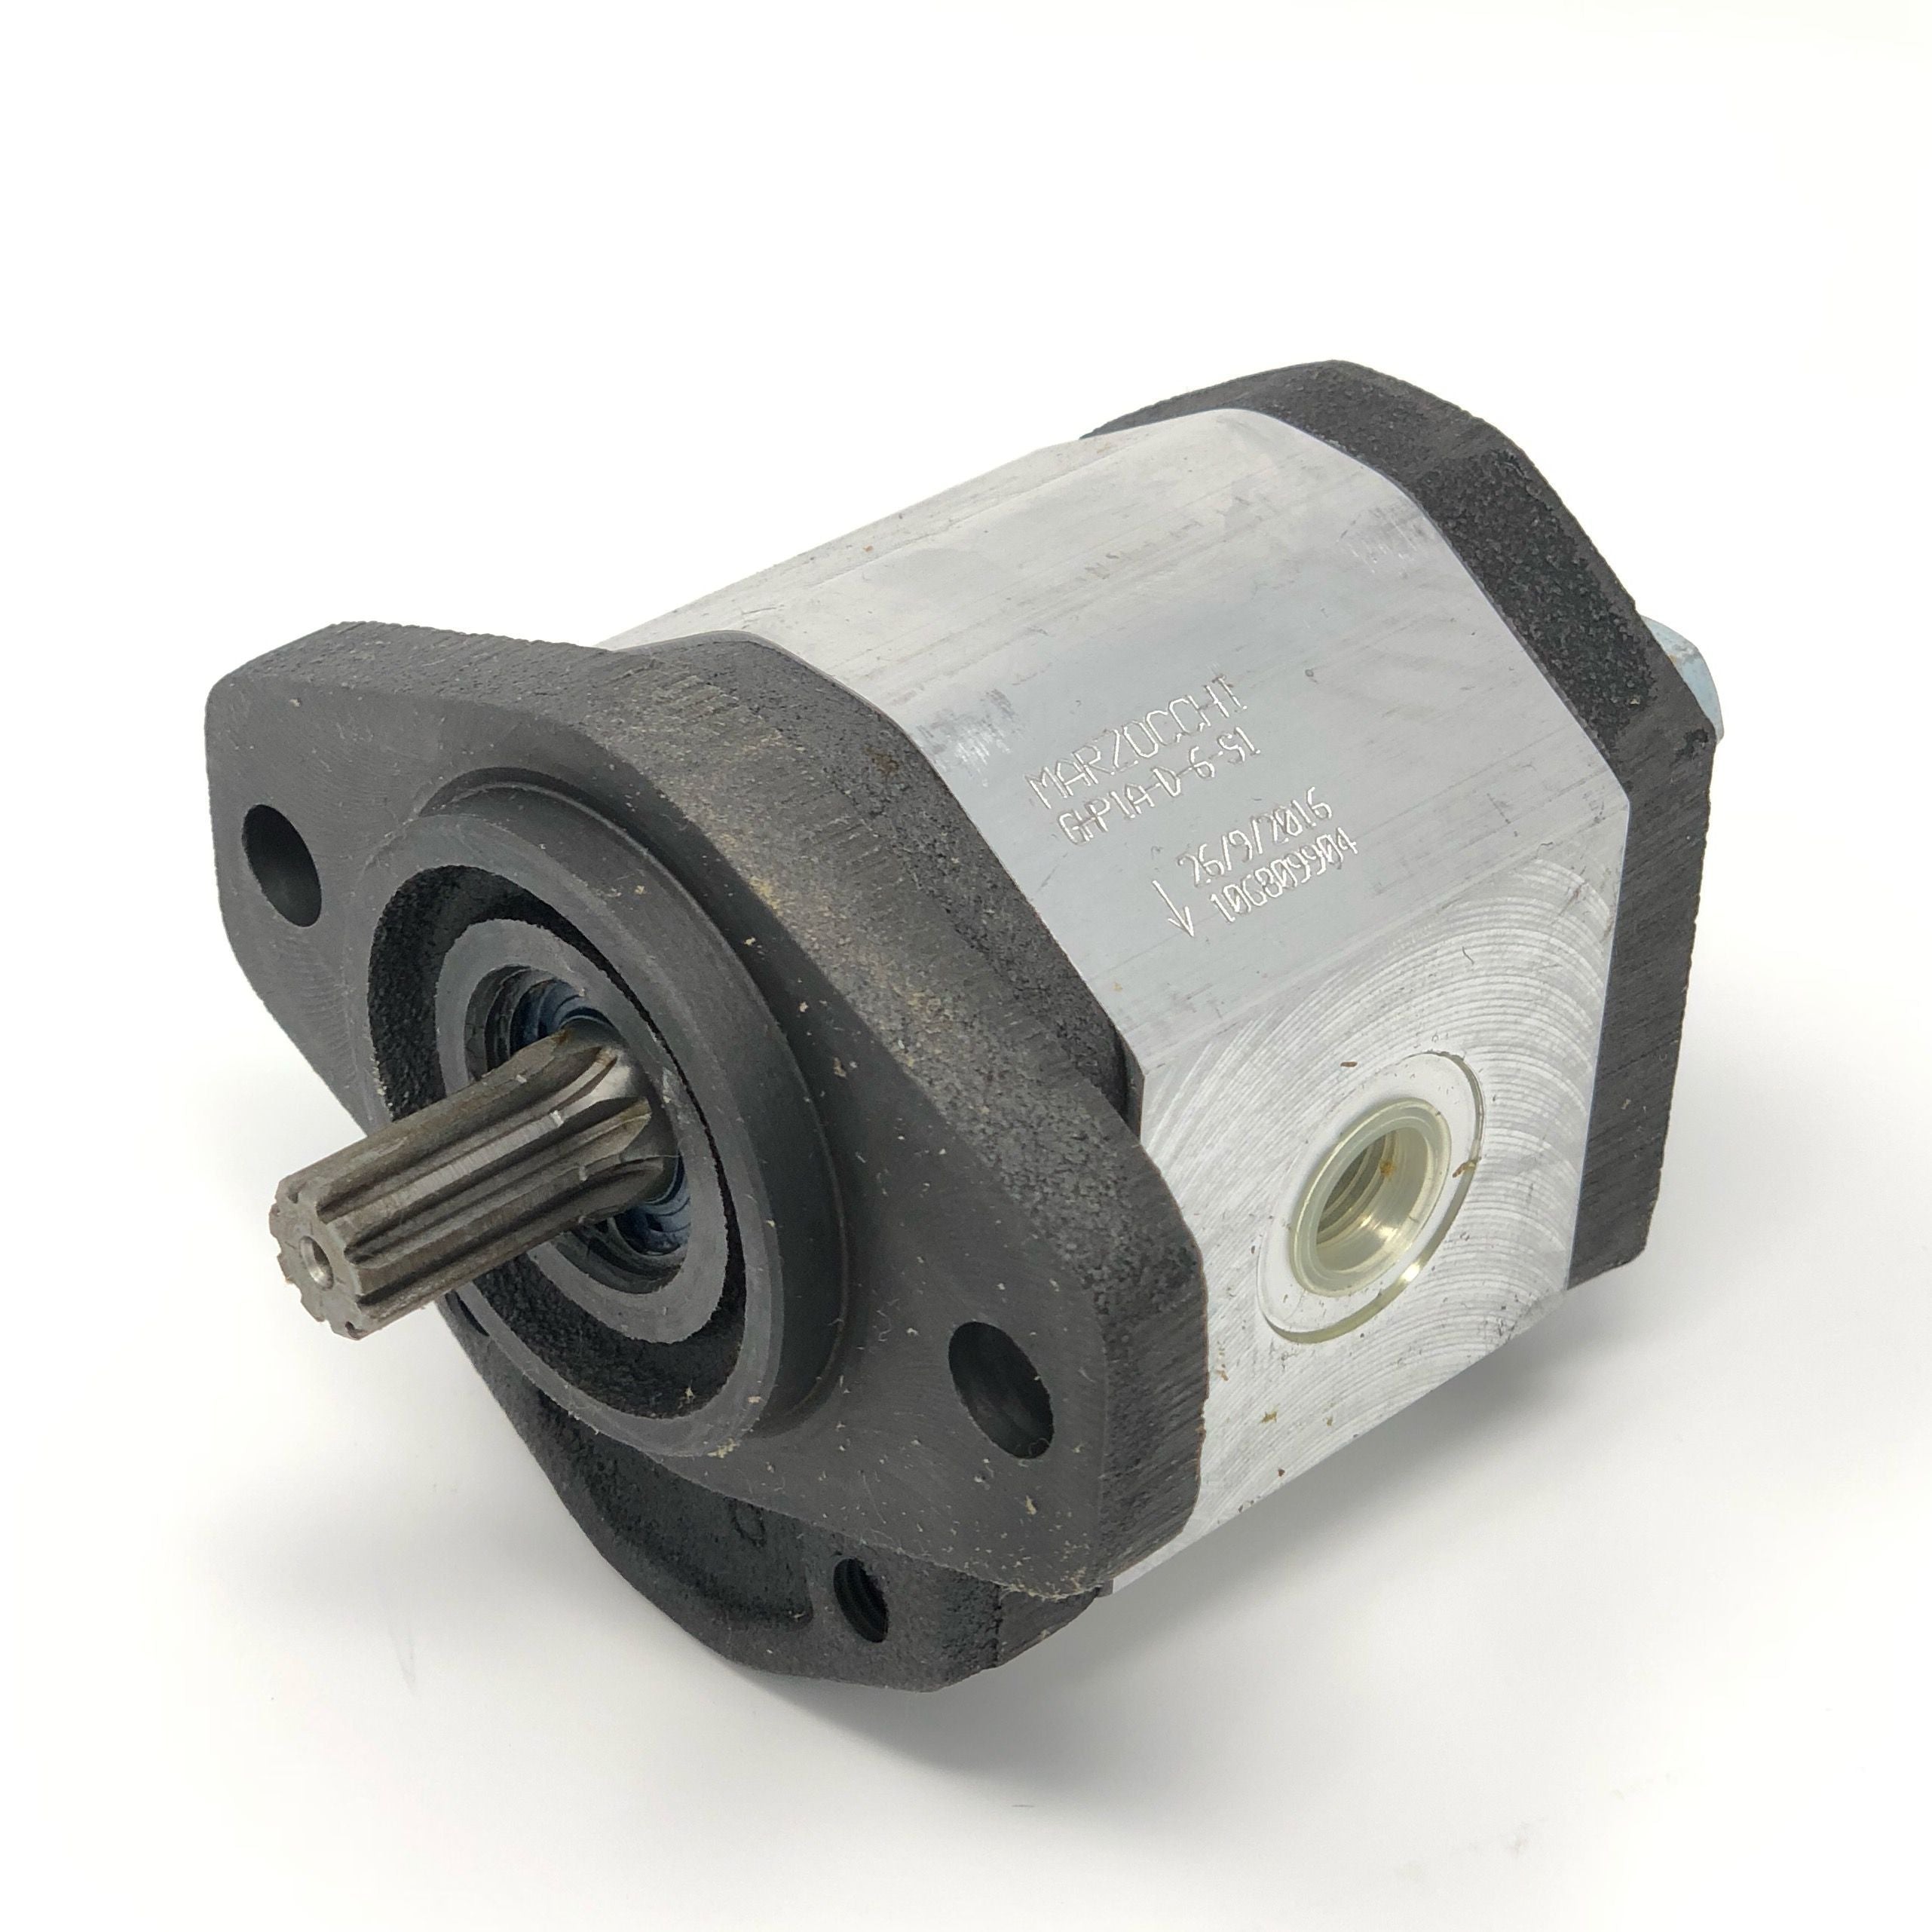 GHP1A-S-7-S1 : Marzocchi Gear Pump, CCW, 5.2cc (0.3172in3), 2.47 GPM, 3770psi, 3500 RPM, #8 SAE (1/2") In, #6 SAE (3/8") Out, Splined Shaft 9T 20/40DP, SAE AA 2-Bolt Mount